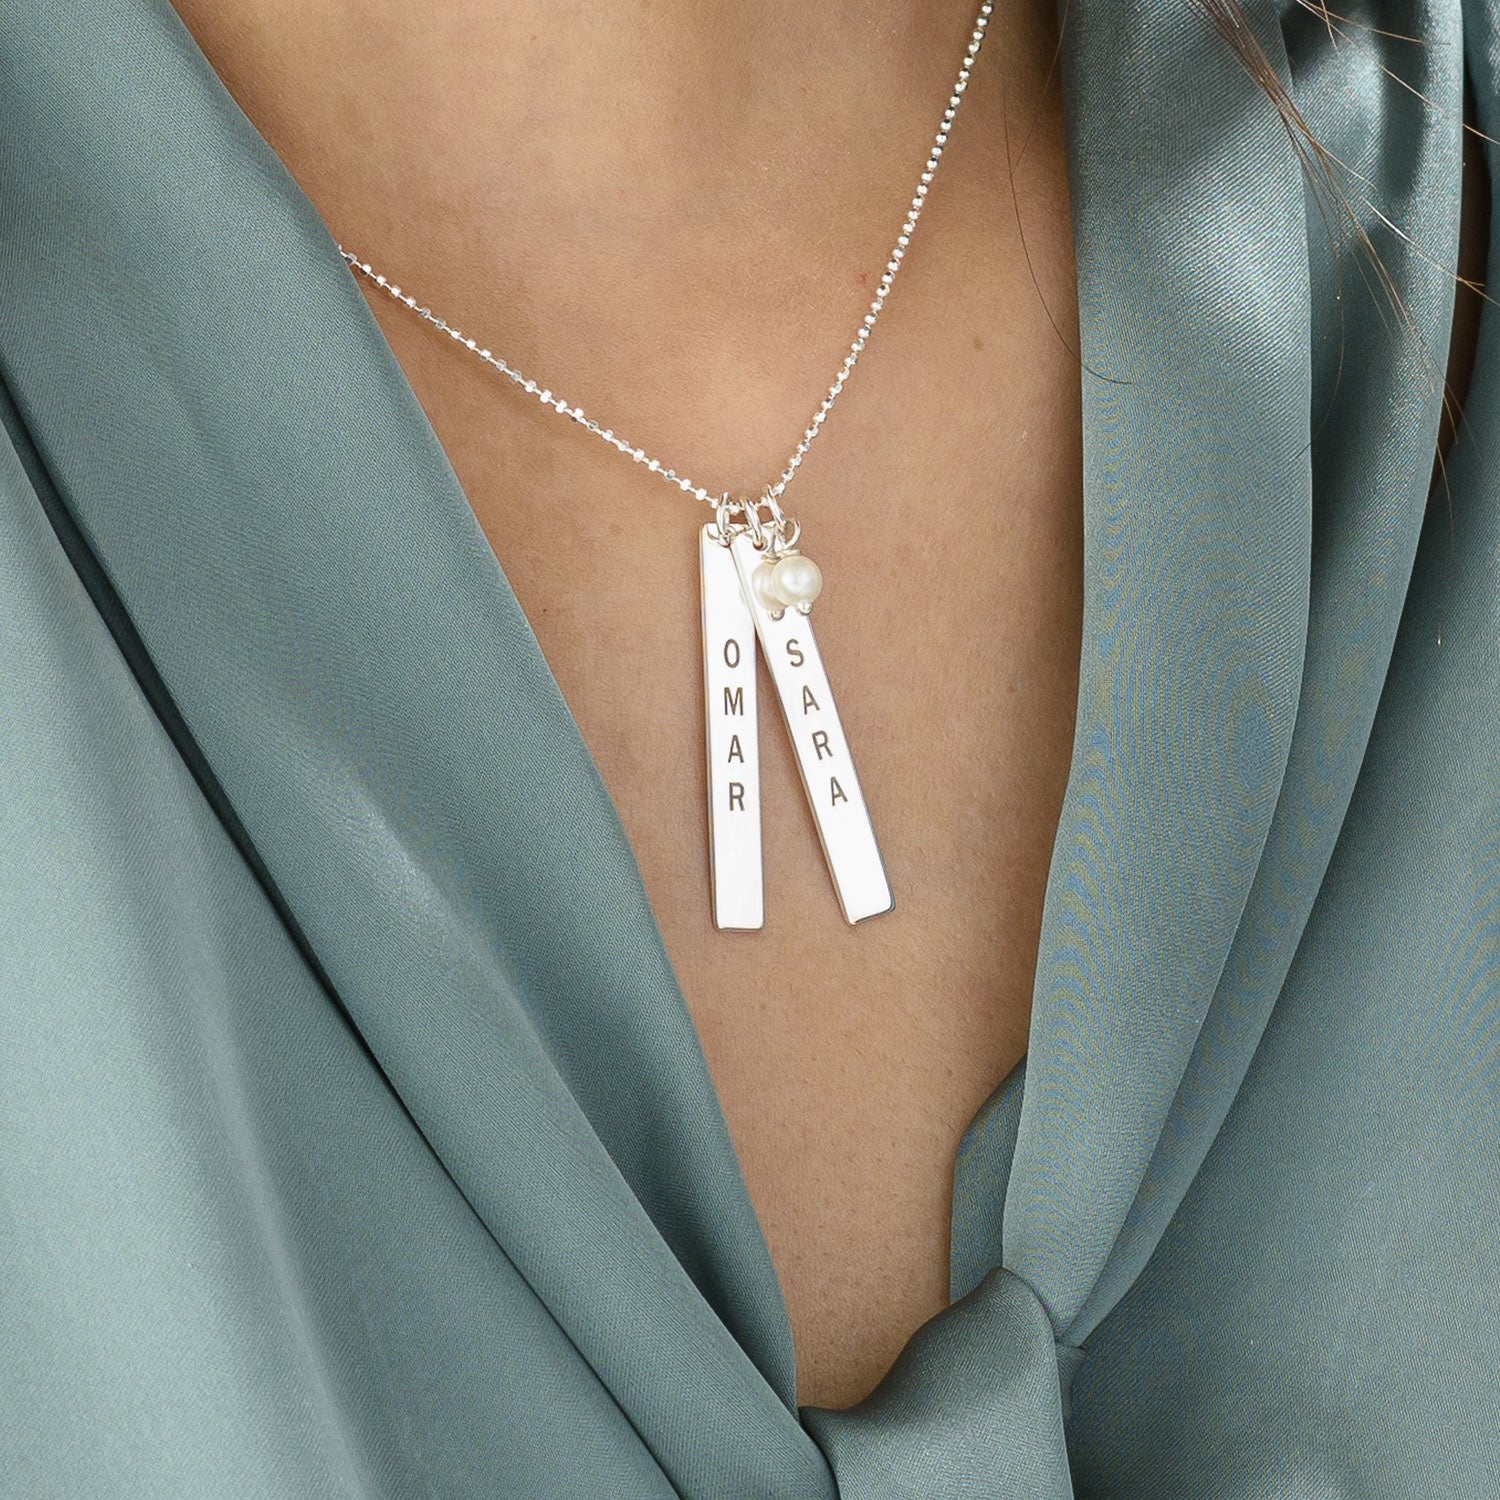 Vertical bar necklace in sterling silver